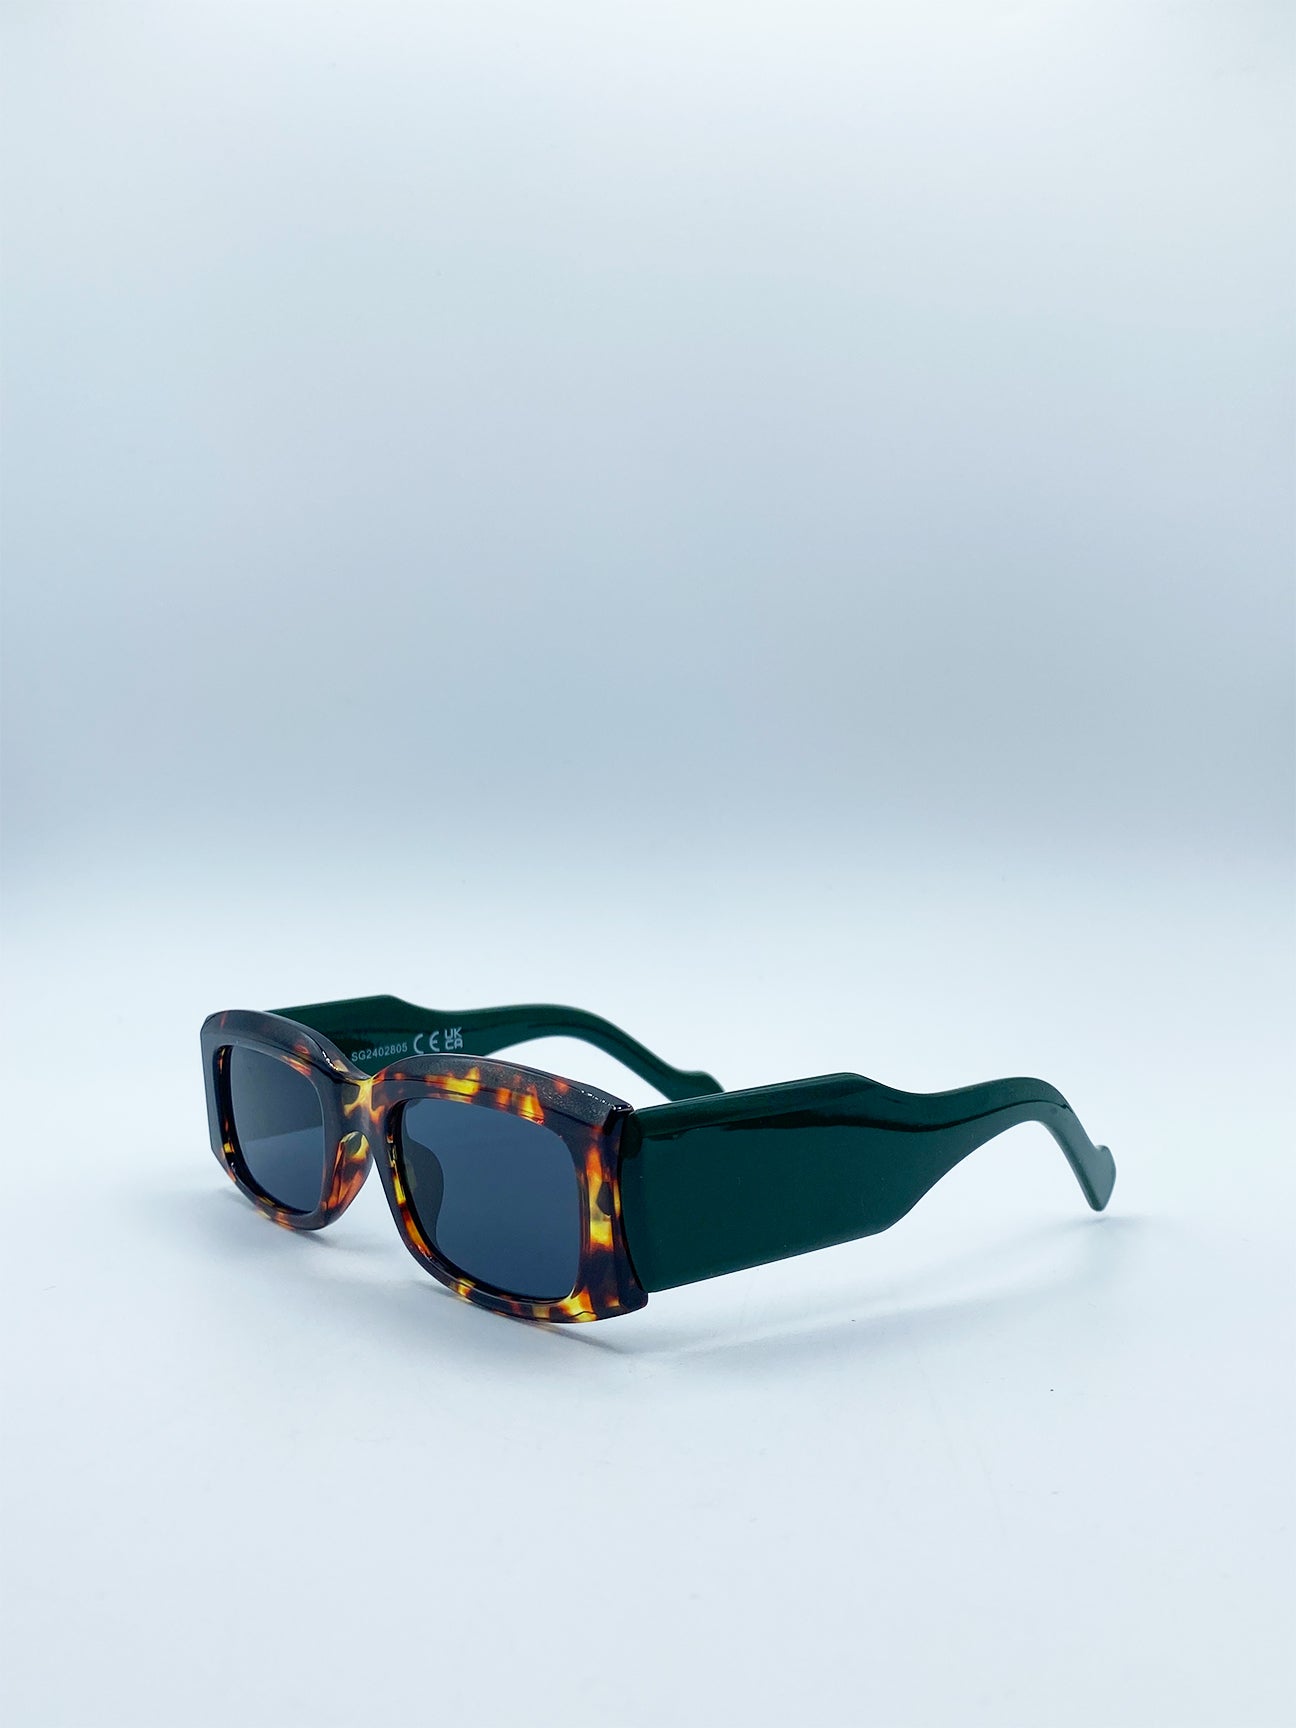 Chunky Rectangle Sunglasses in Green with Tortoiseshell Arms